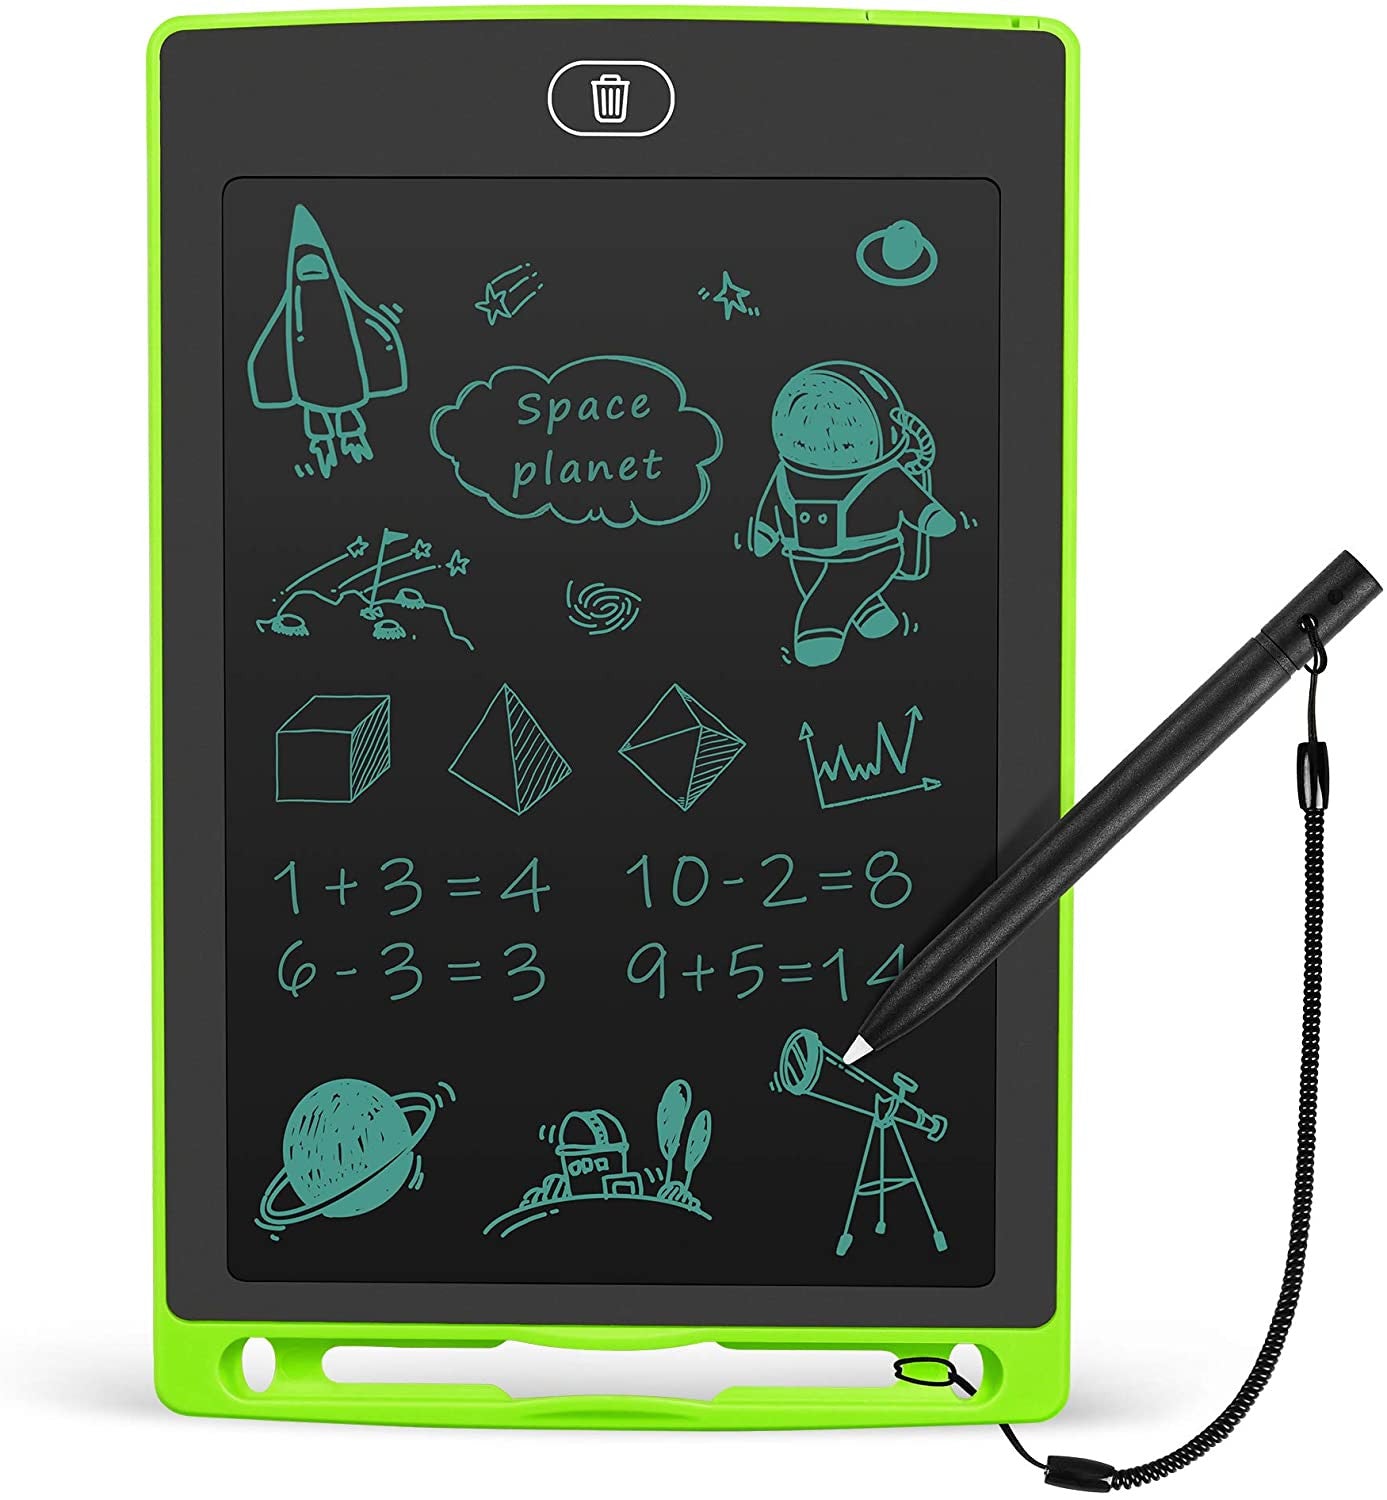  Magnetic Drawing Board for Kids, Drawing Board Learning Painting  for Toddlers 1-3, Graffiti Magnetic Exercise Drawing Pad, Writing Pad,  Colorful Erasable Doodle Board for Kids Gifts : Toys & Games